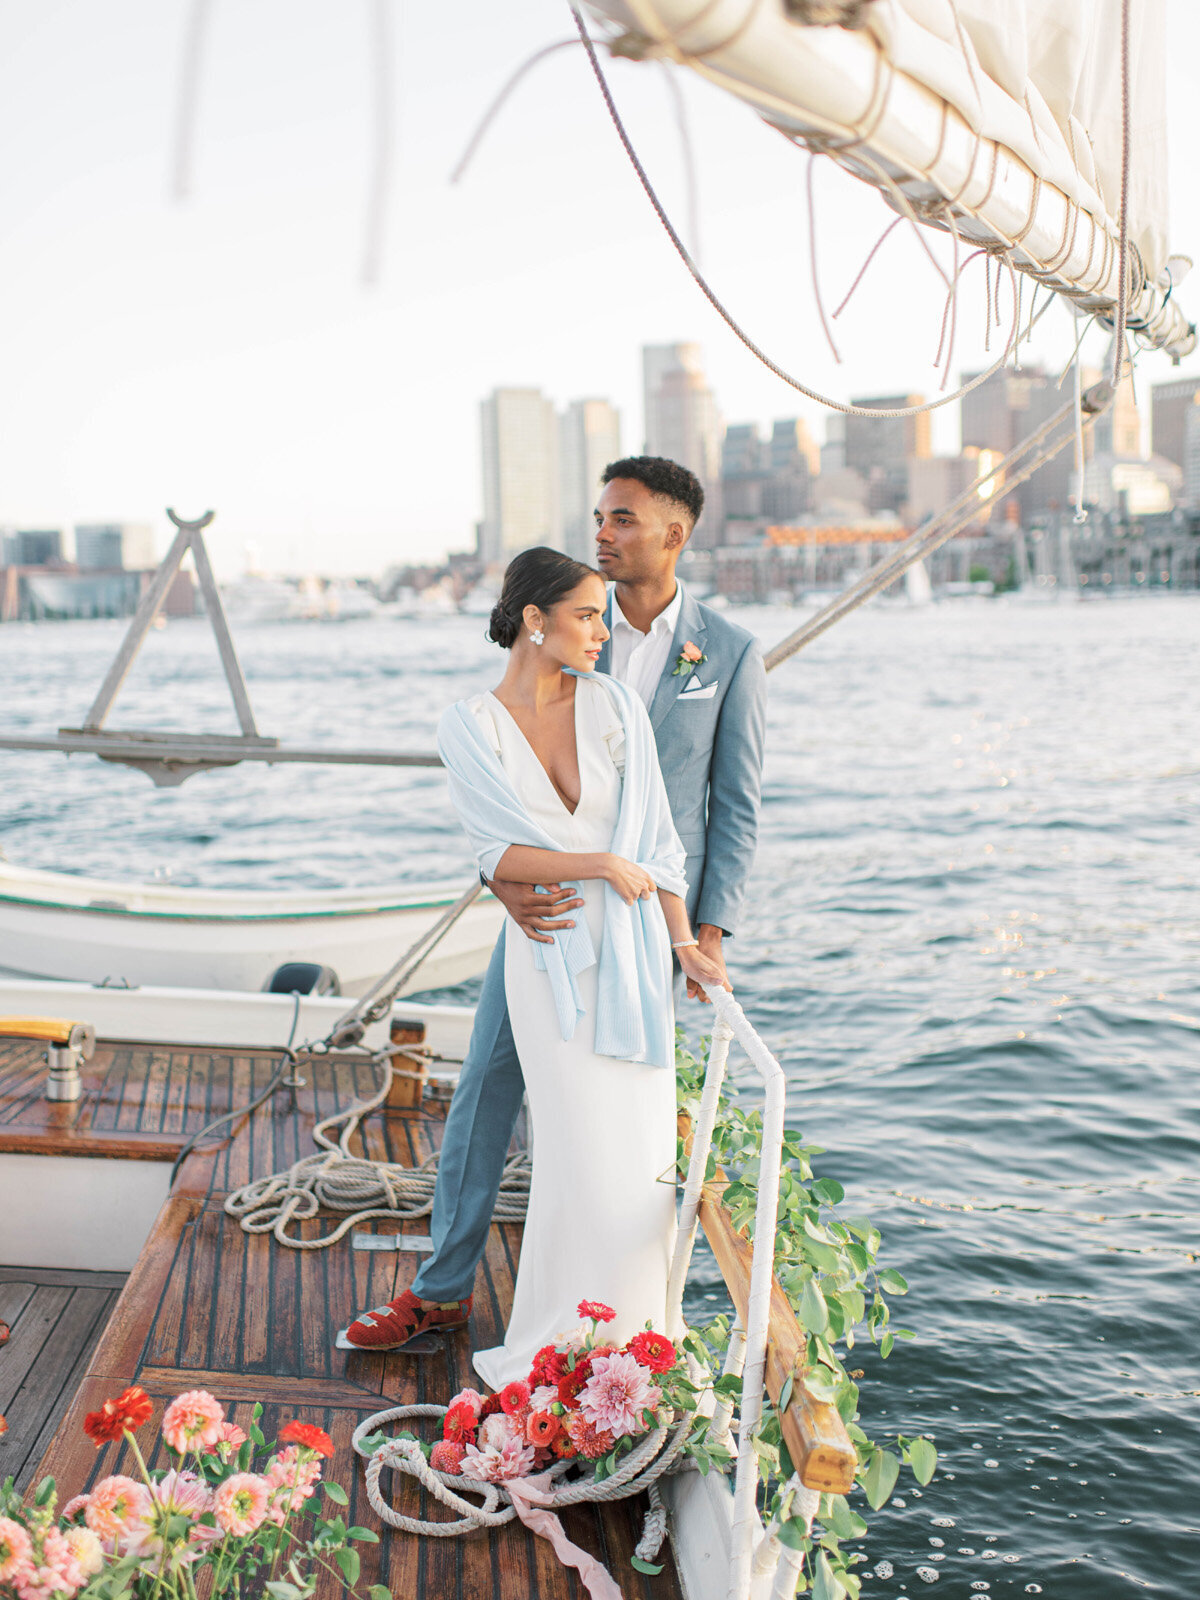 Kate-Murtaugh-Events-elopement-wedding-planner-Boston-Harbor-sailing-sail-boat-yacht-greenery-water-city-skyline-couple-married